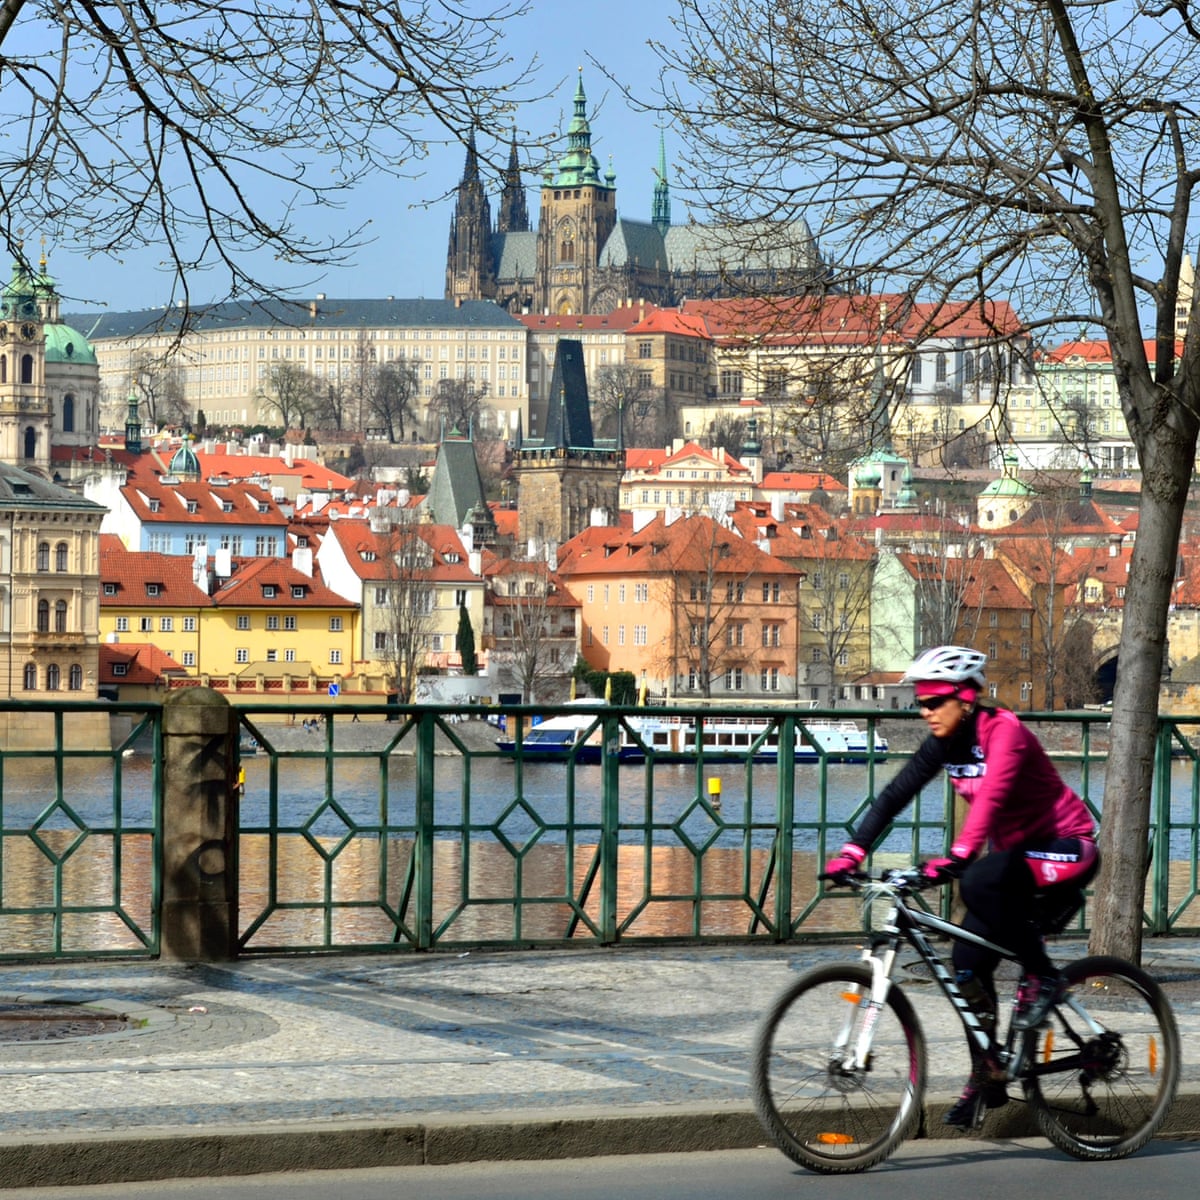 Wheeling the axe: Prague to ban bikes from historic squares and streets | Cities | The Guardian